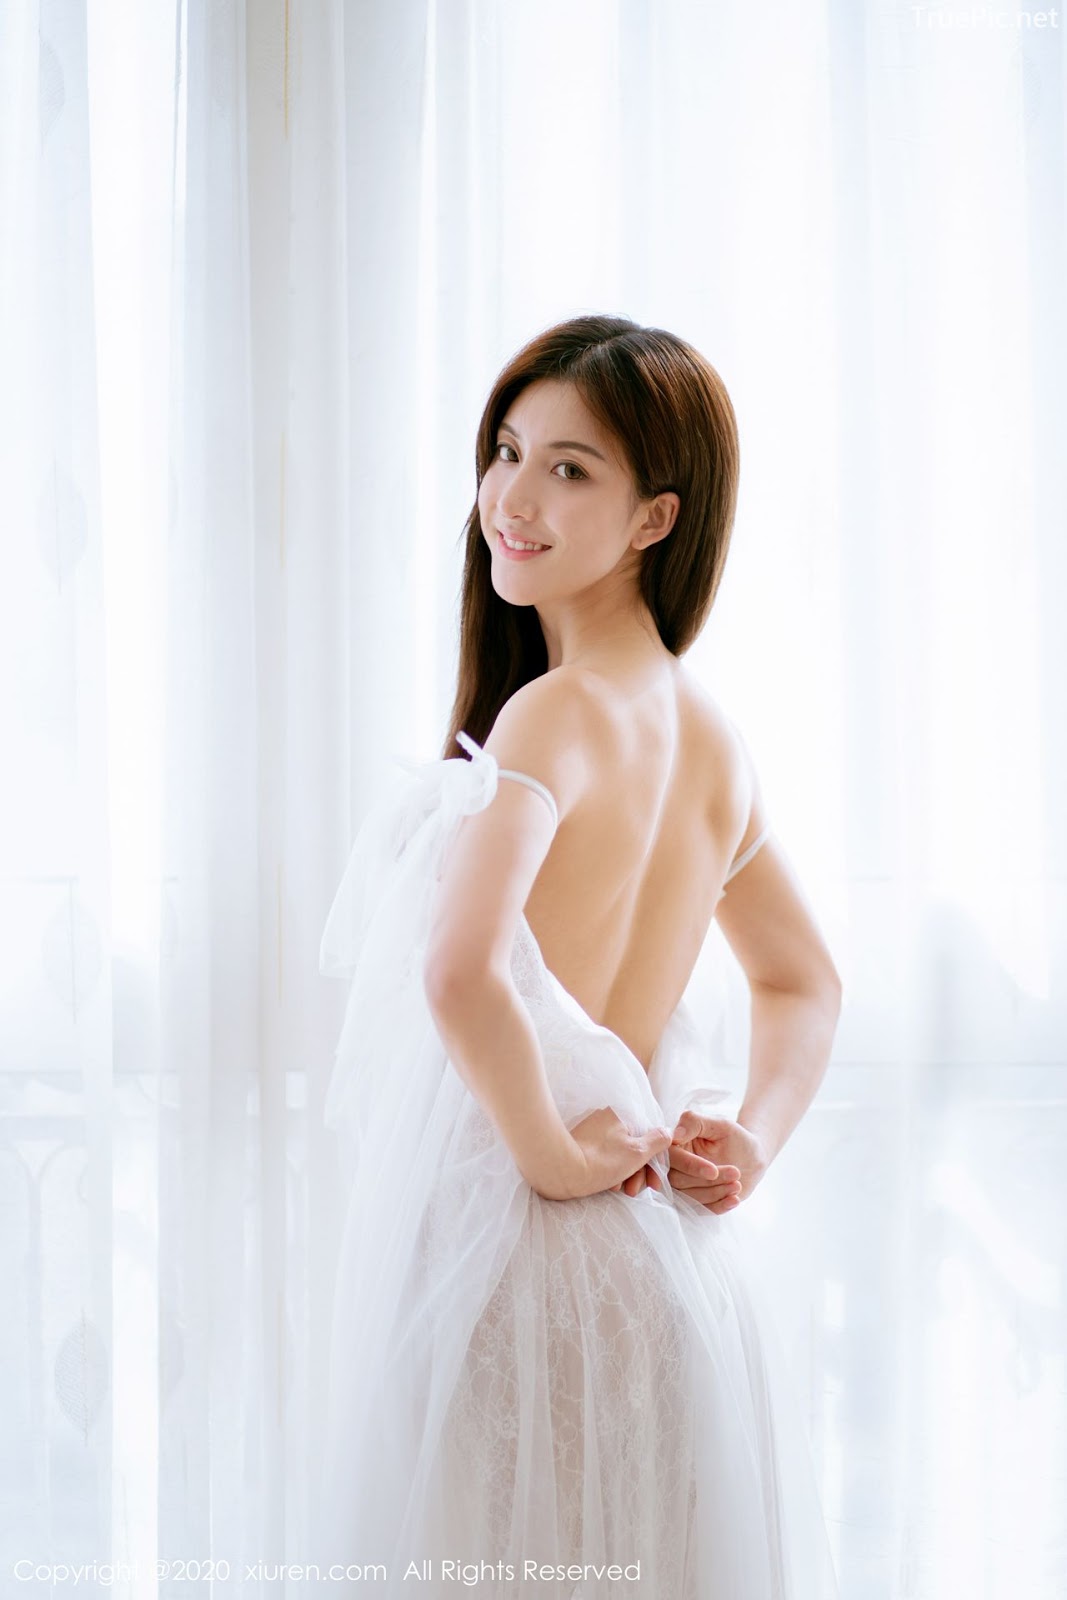 XIUREN No.1914 - Chinese model 林文文Yooki so Sexy with Transparent White Lace Dress - Picture 31